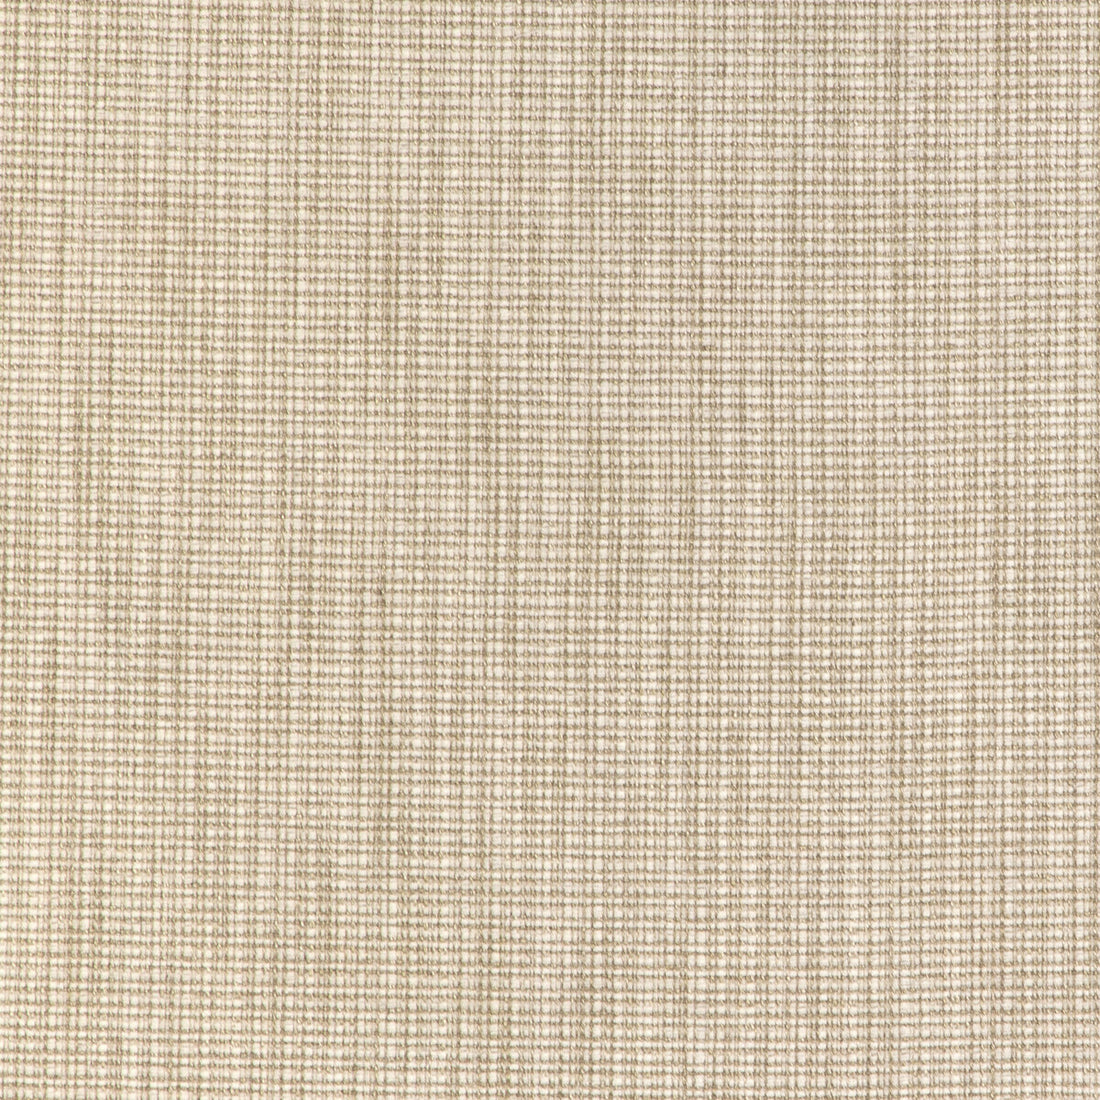 Kravet Design fabric in 36958-1614 color - pattern 36958.1614.0 - by Kravet Design in the Sustainable Textures II collection